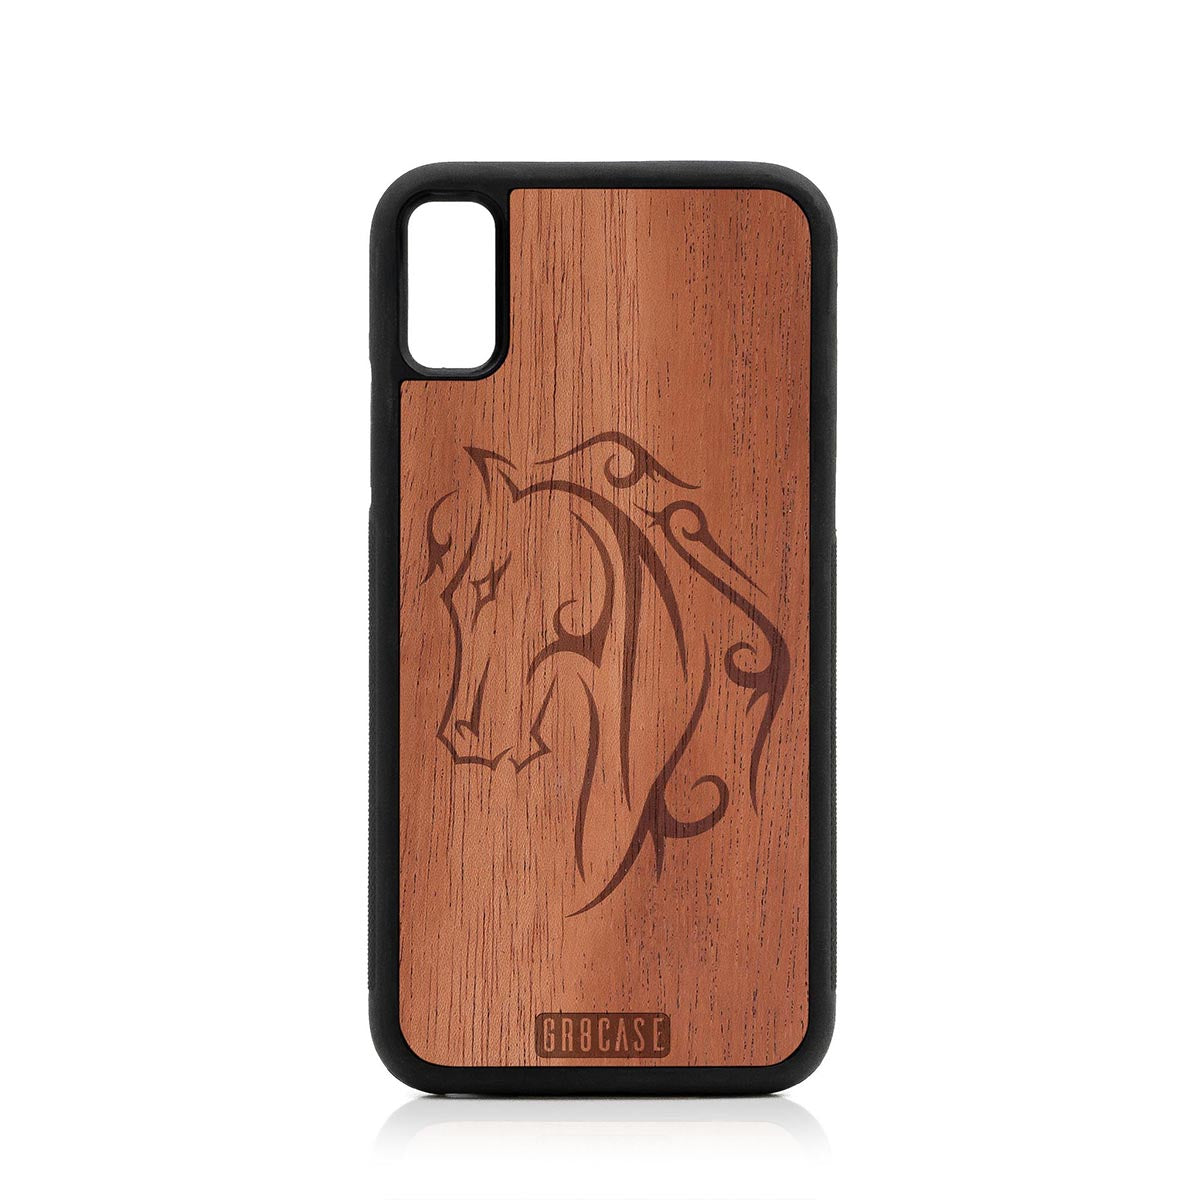 Horse Tattoo Design Wood Case For iPhone XR by GR8CASE